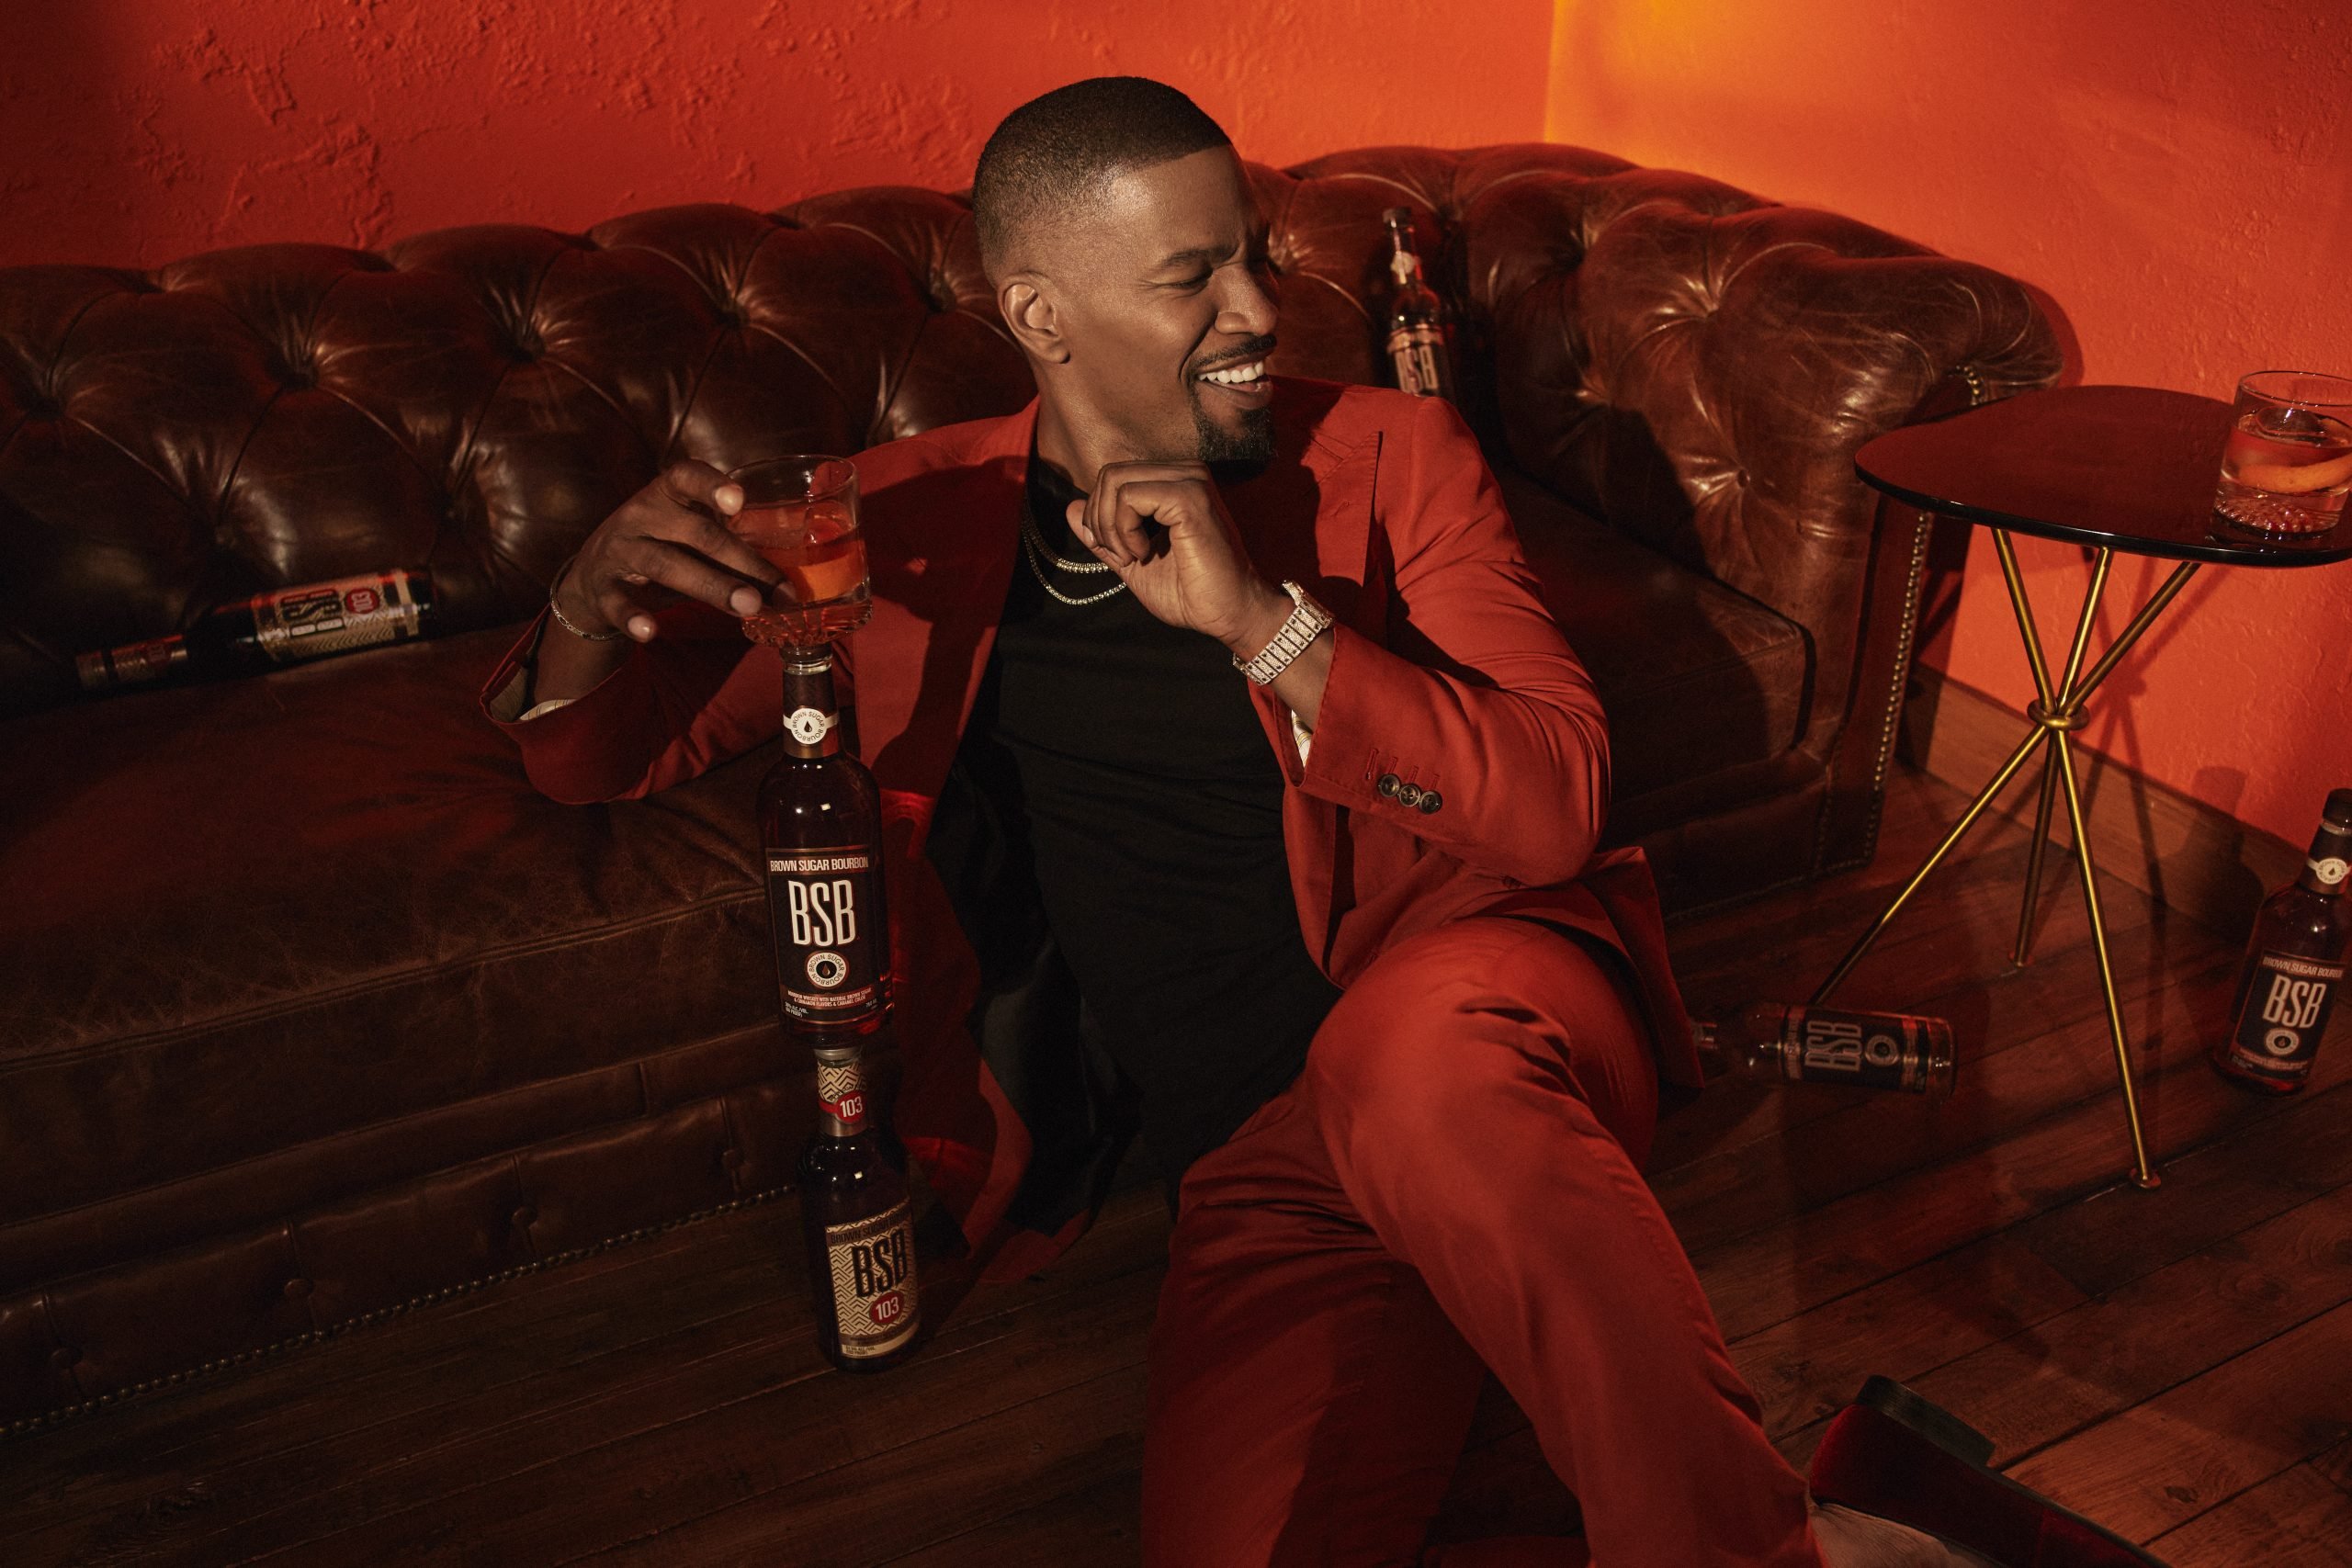 Jamie Foxx opens up to Worth columnist Arick Wierson about life, celebrity and his new bourbon. Photo by Nicholas Maggio